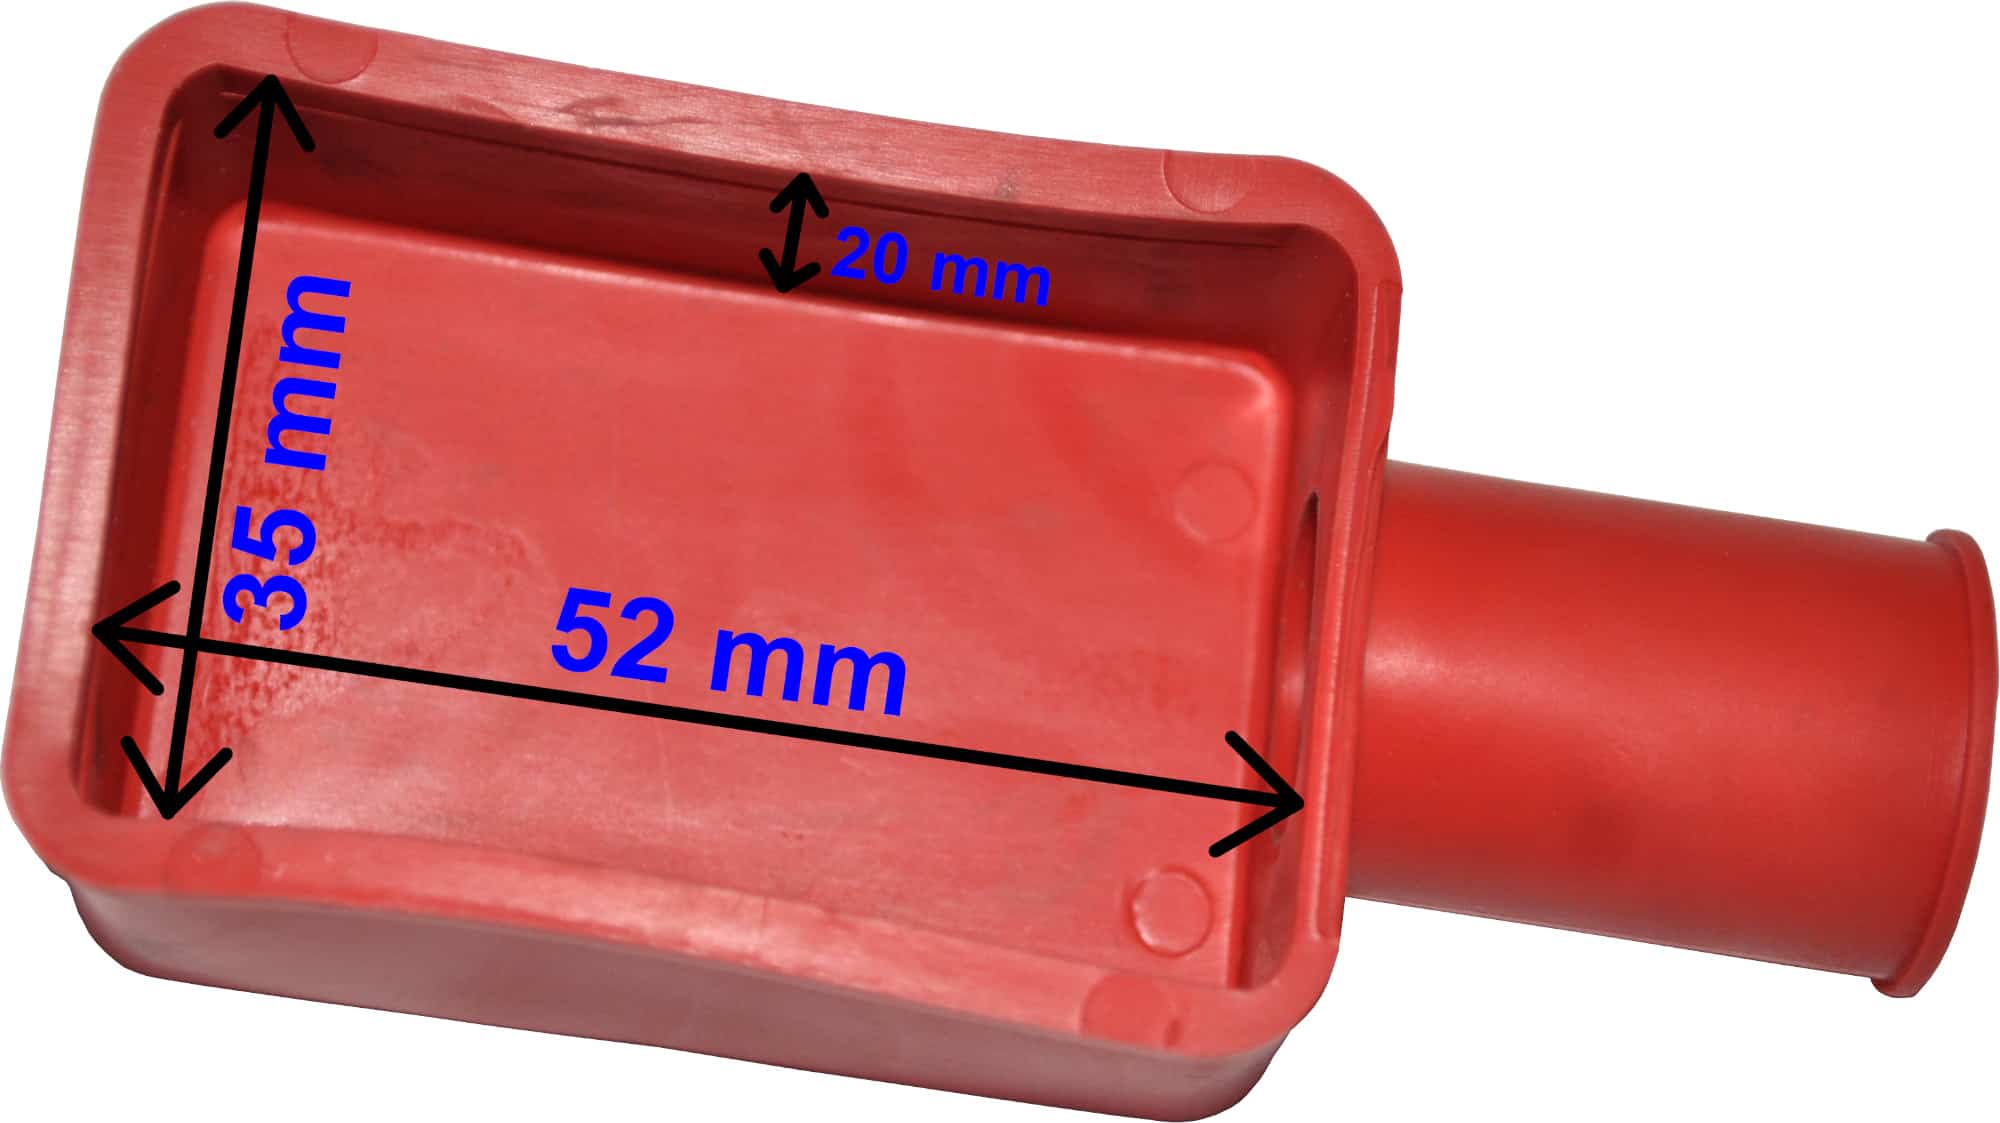 Cover coat hood protector for terminal pole battery shoes battery pole red car truck motorcycle scooter tractor camping Insulating Cap protective cap dust cover 020291R RACO